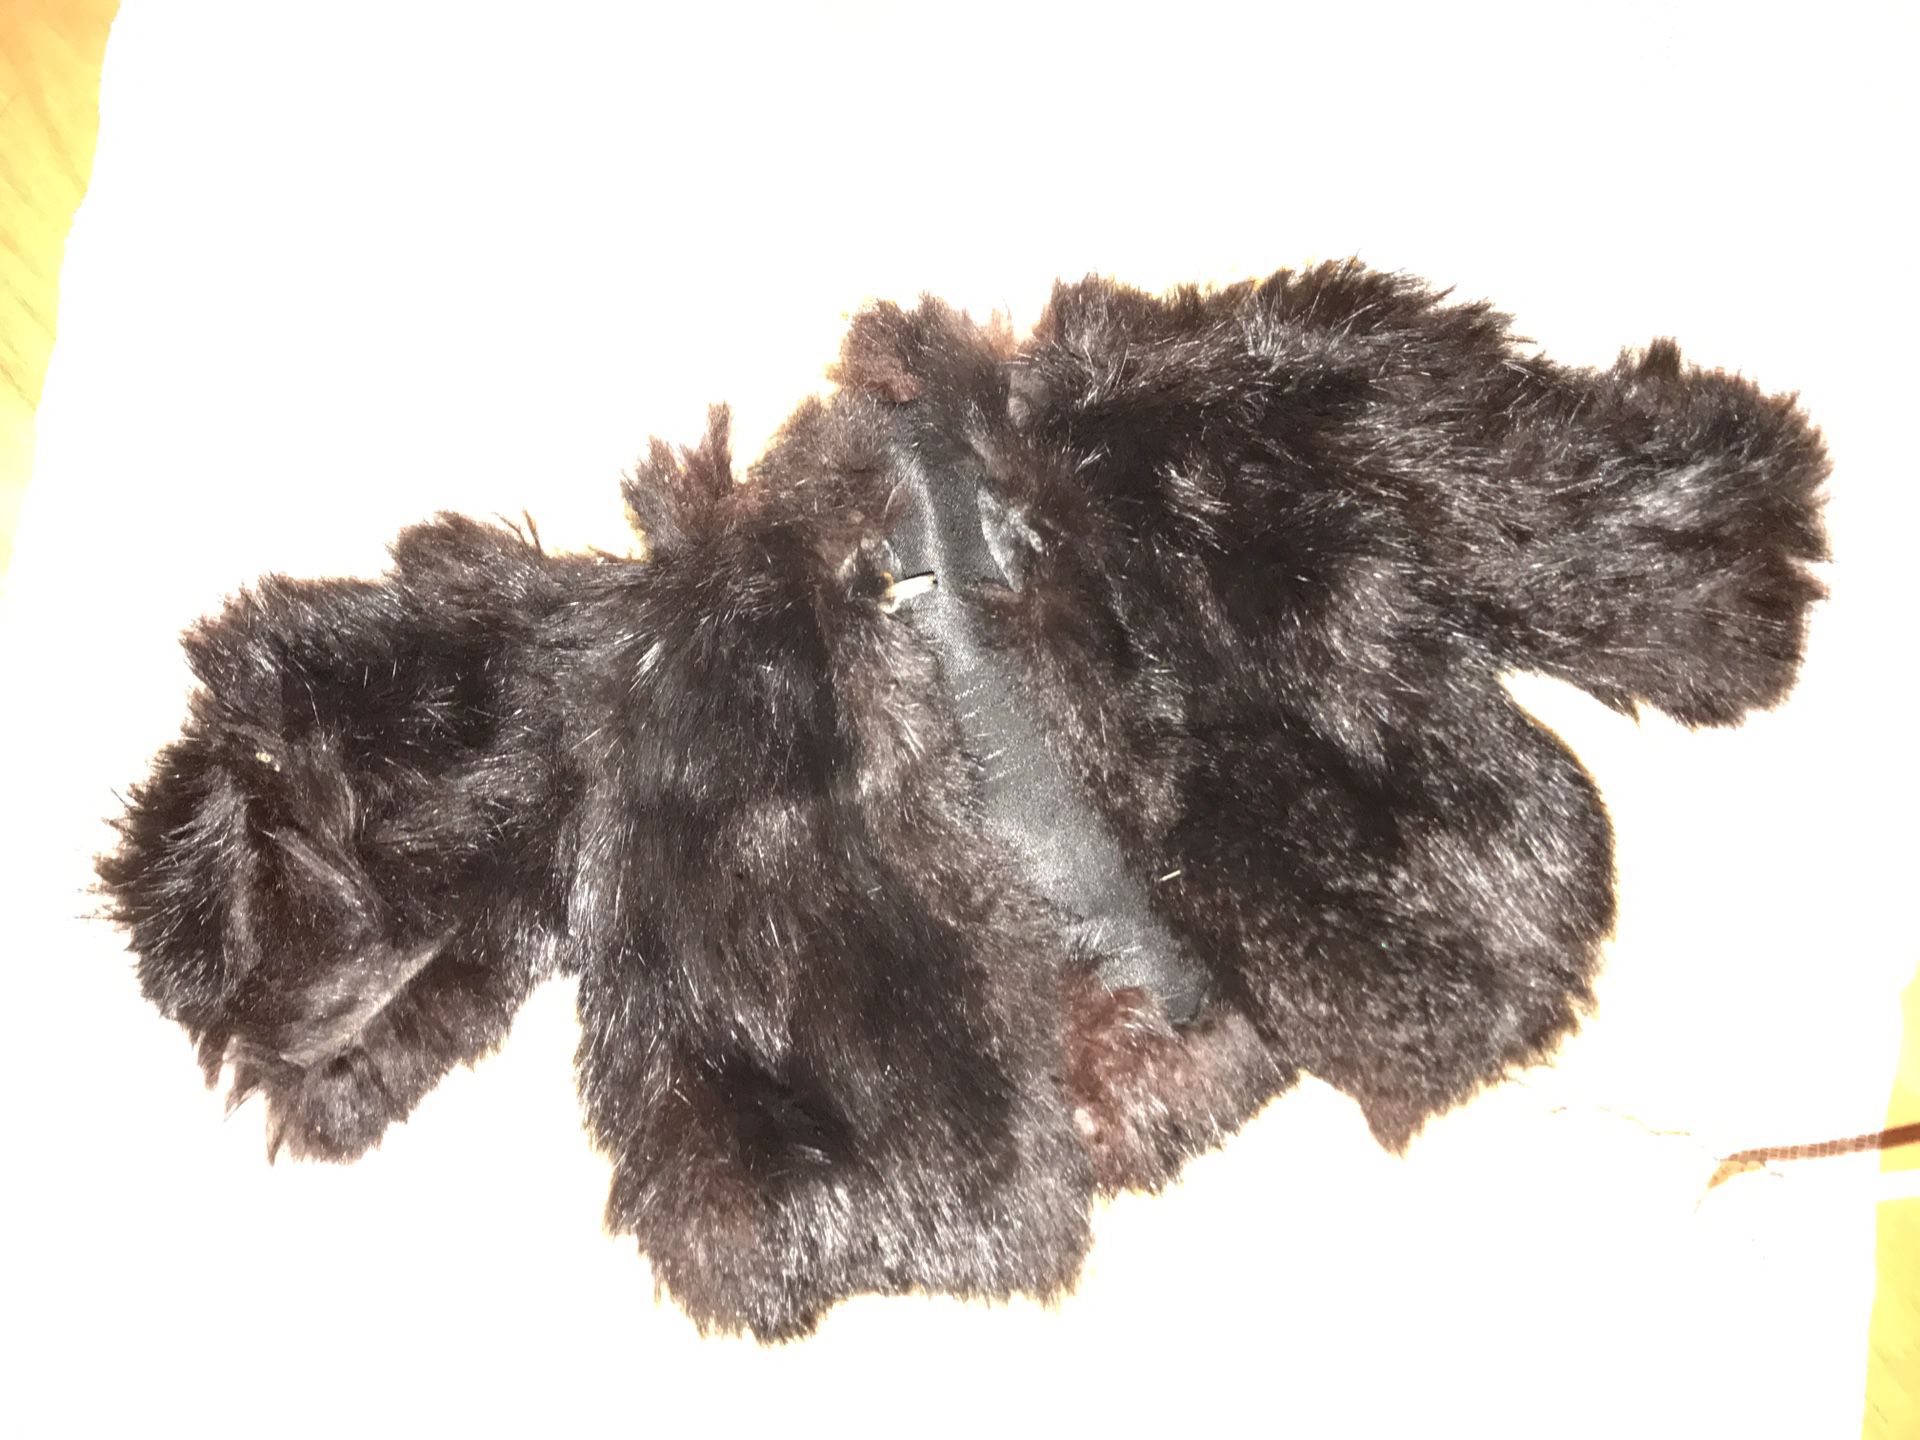 Antique real fur coat for Dolly